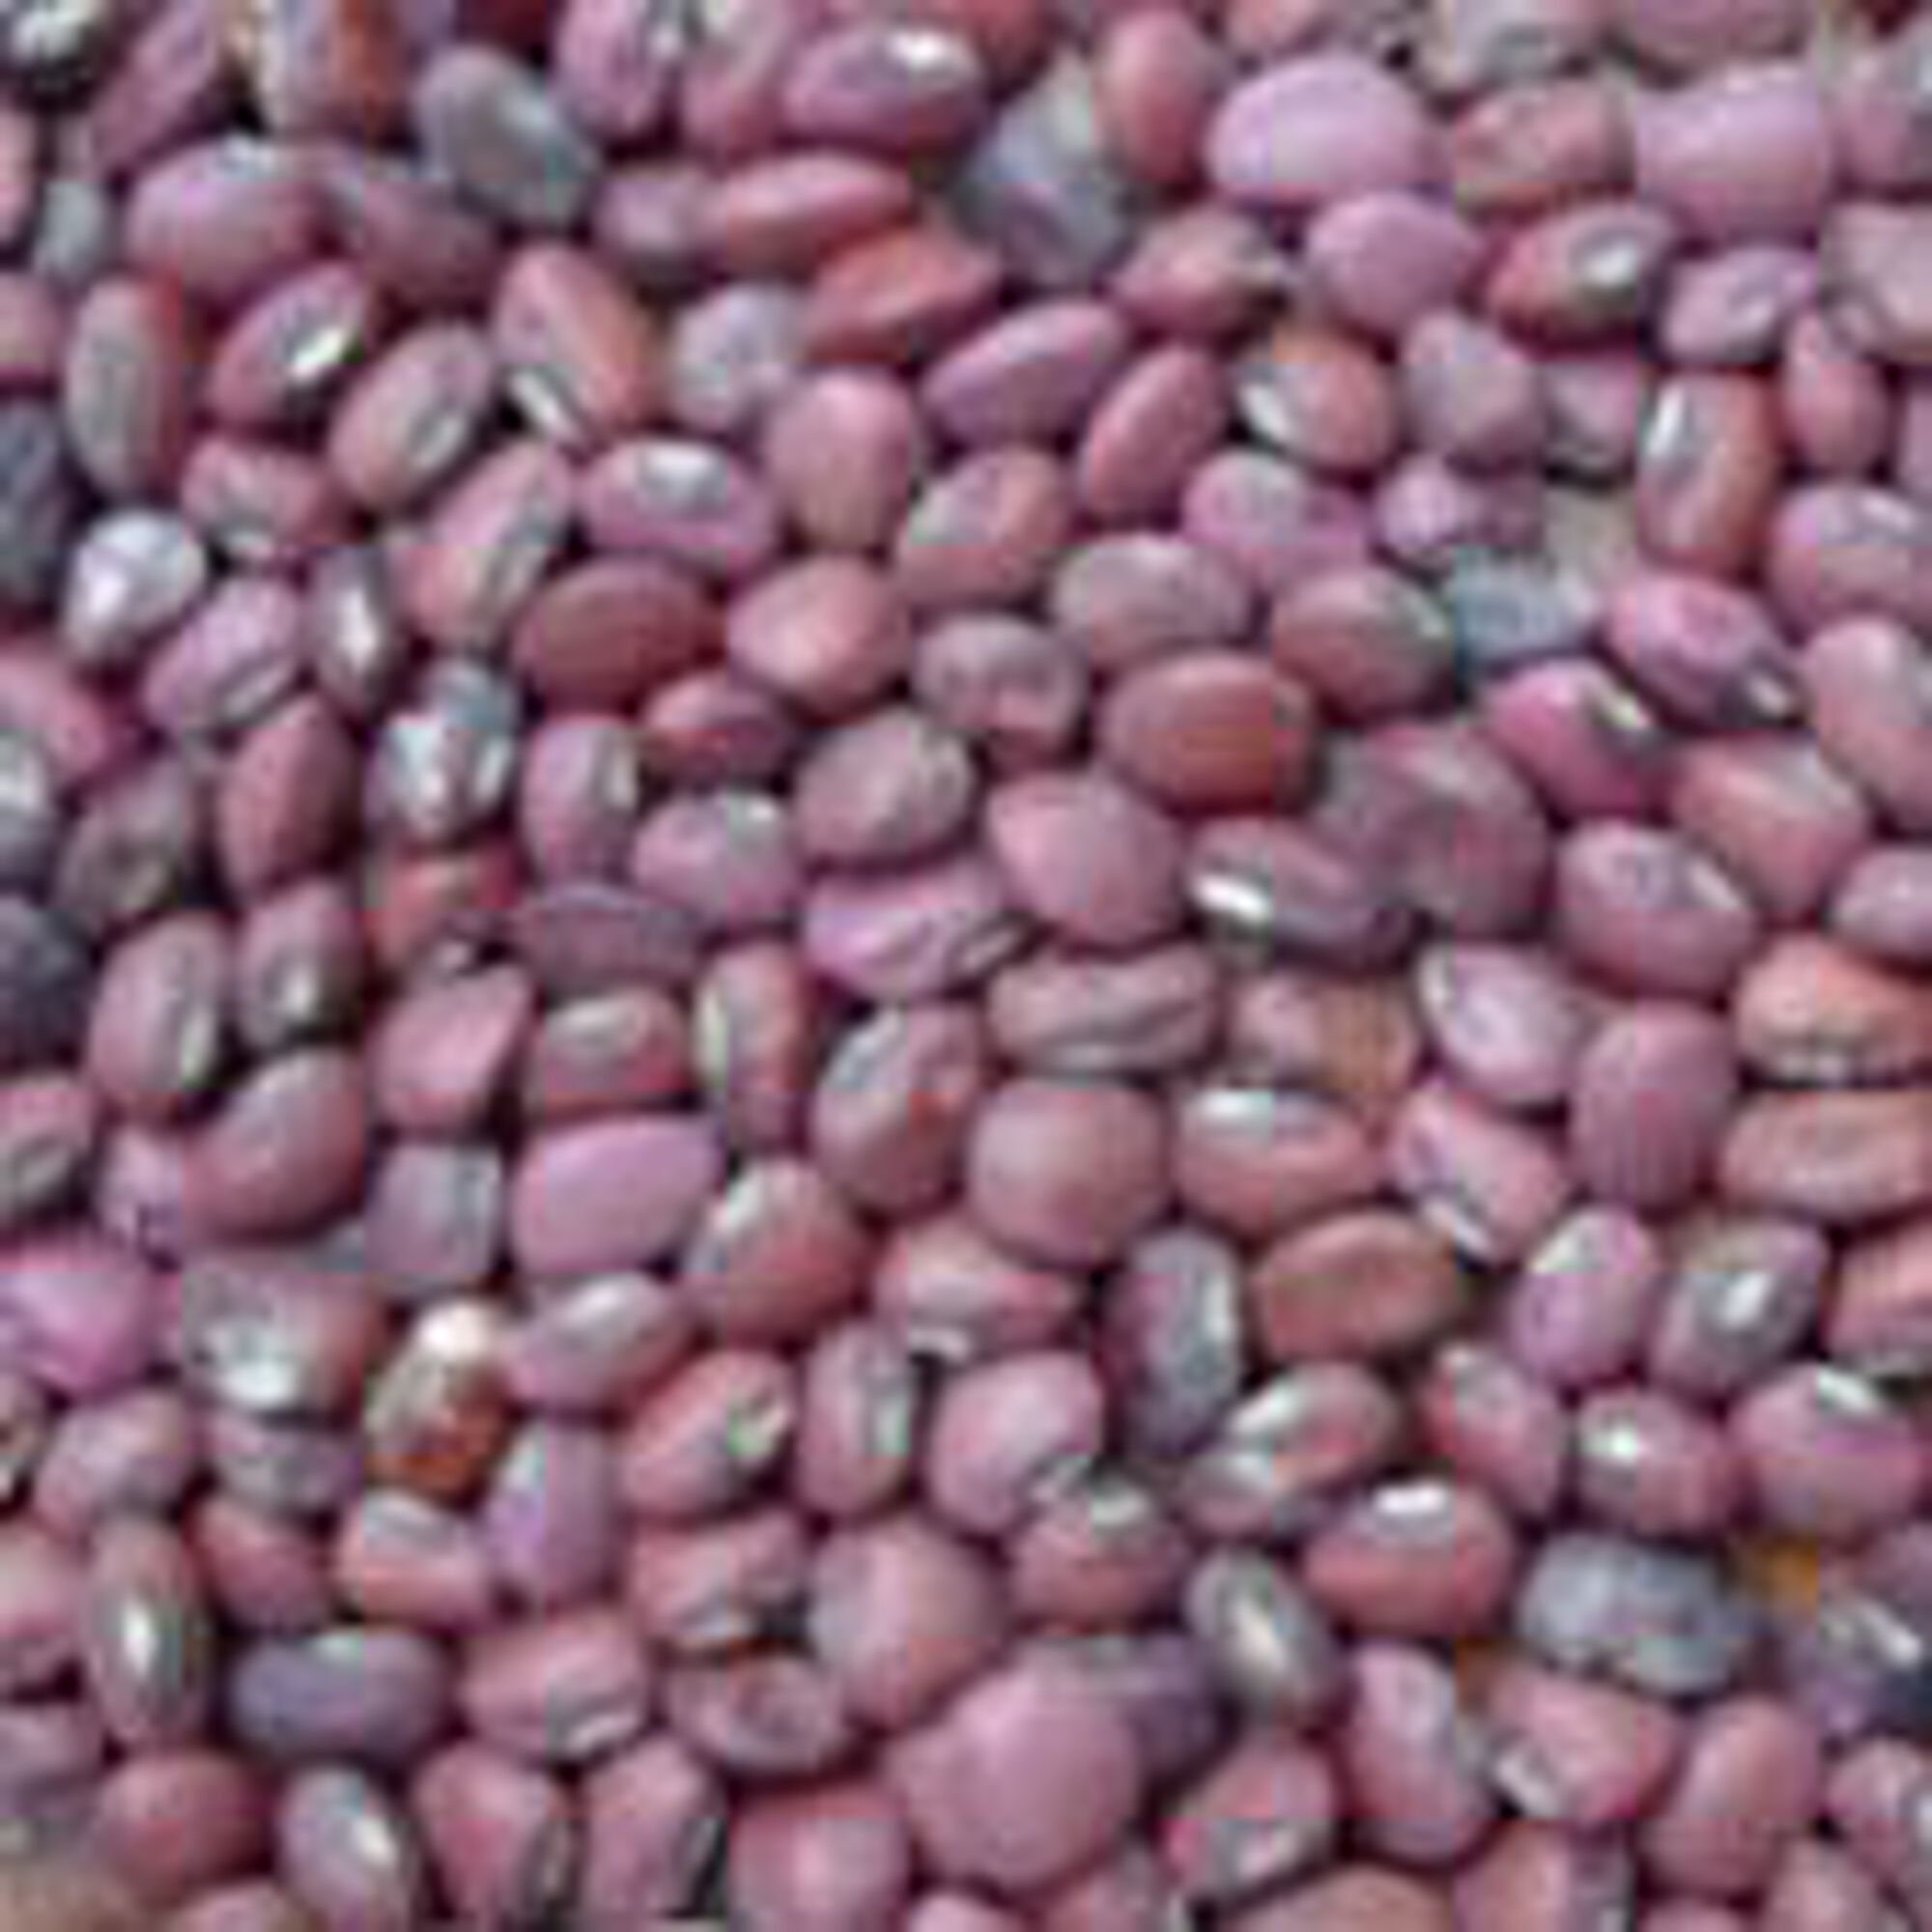 Red Ripper Cowpeas Seeds Etsy